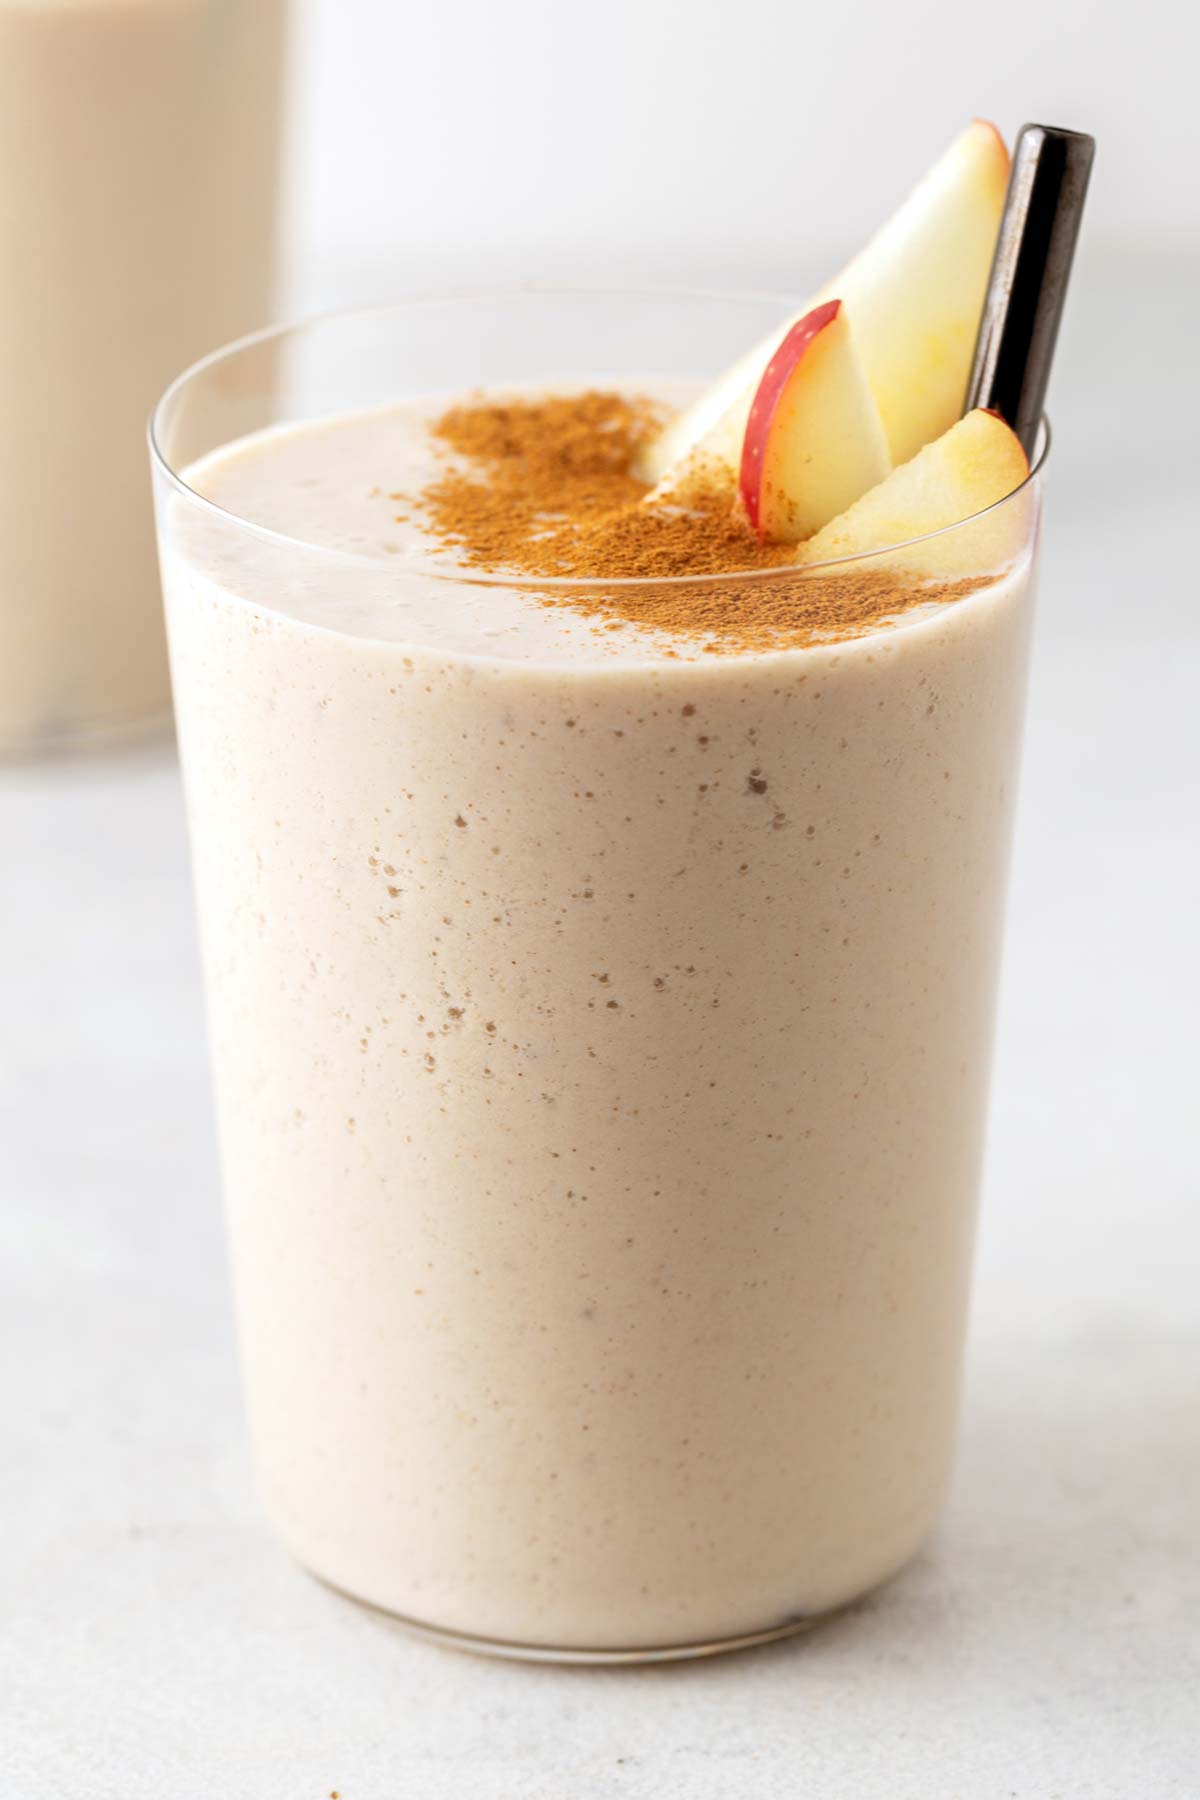 Apple smoothie in a glass.